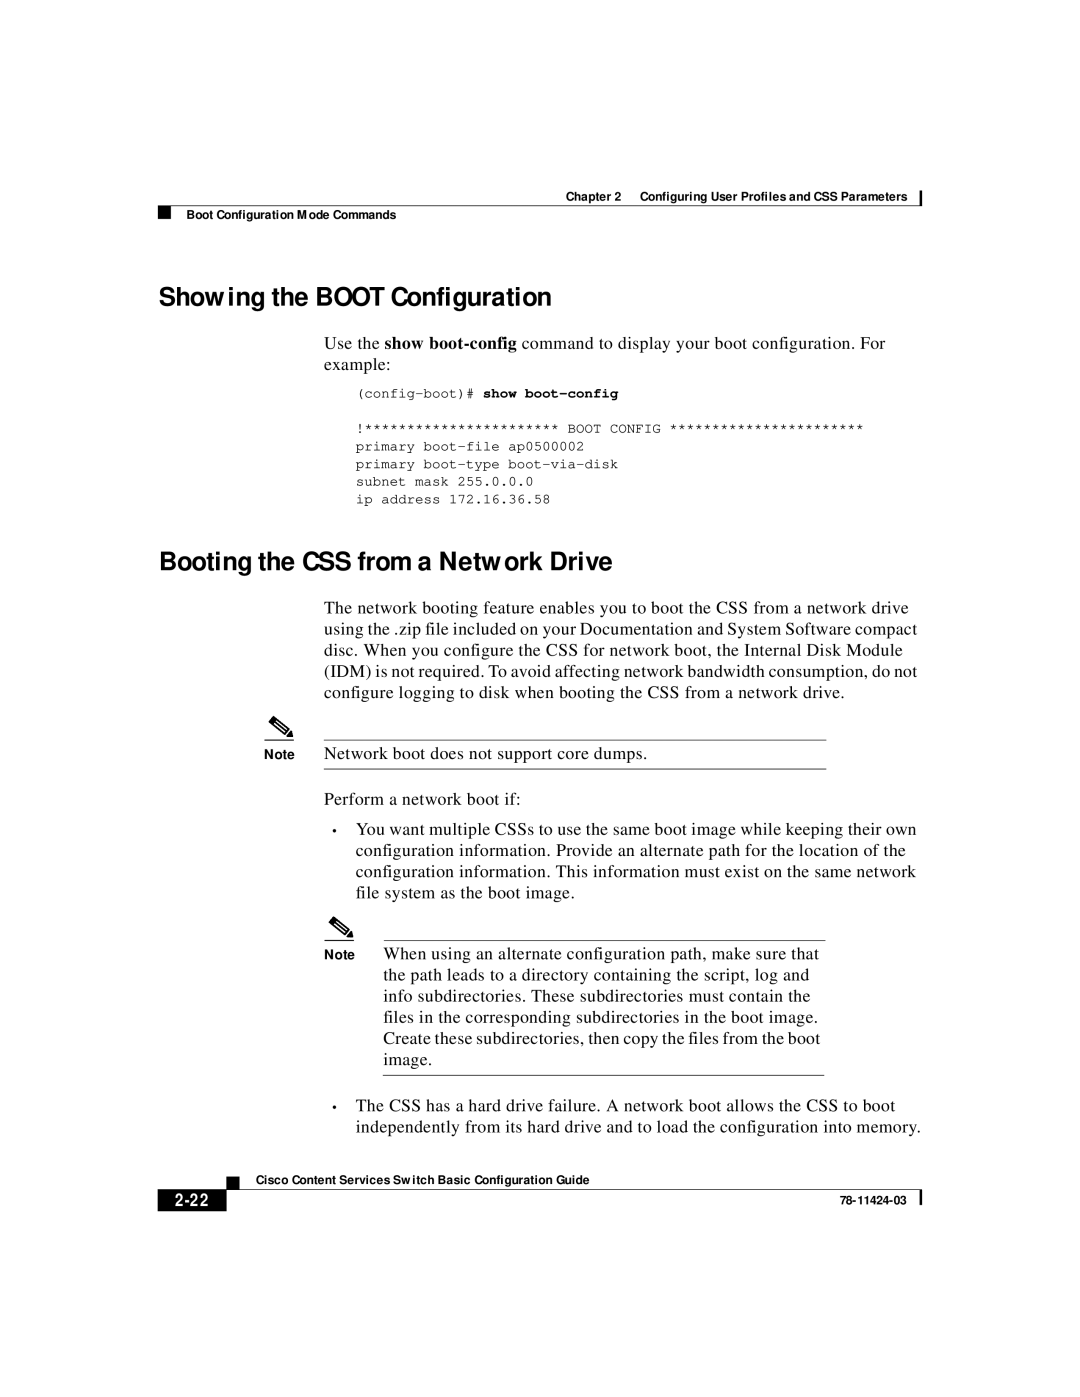 Cisco Systems 78-11424-03 manual Showing the BOOT Configuration, Booting the CSS from a Network Drive, 2-22 